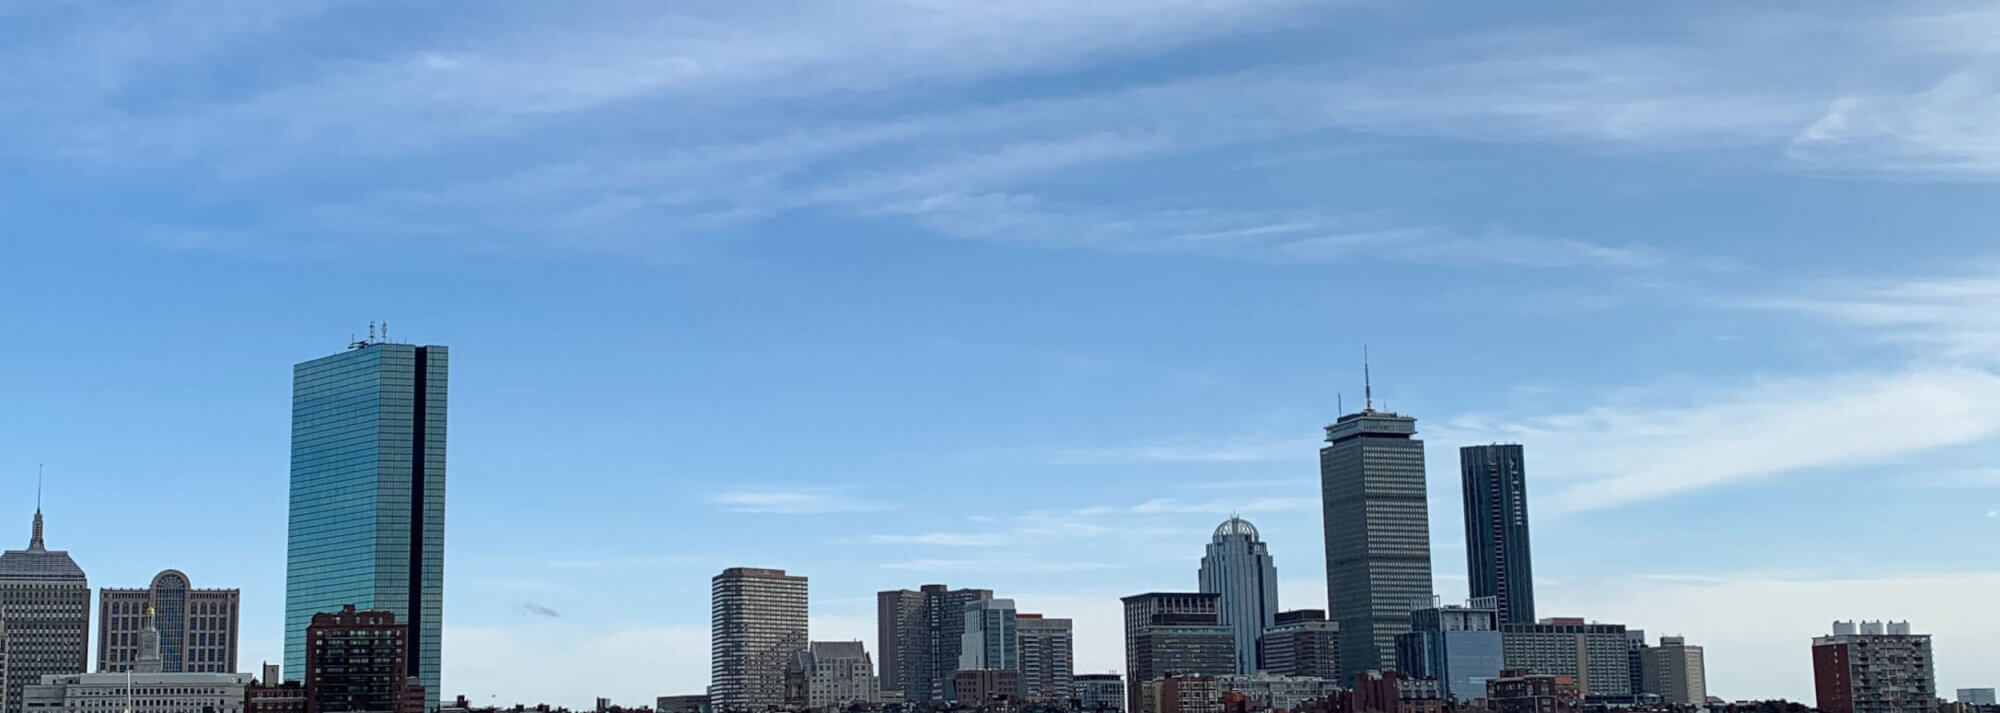 A picture showing the Boston skyline with the text, "Join other Massachusetts homeowners and make the most of your home’s equity" over it.